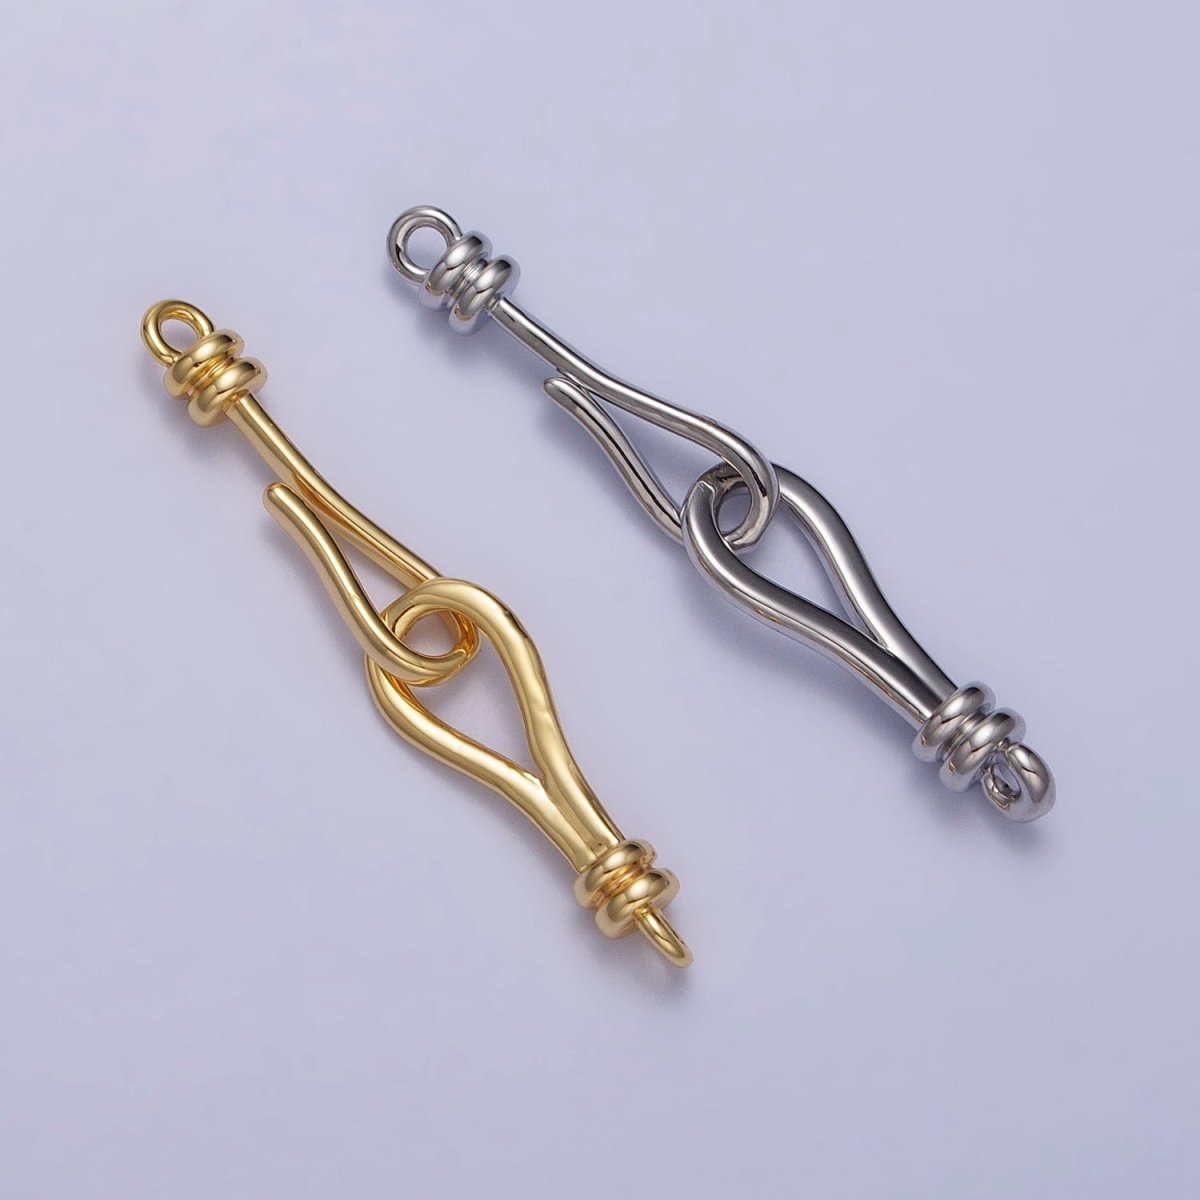 Gold, Silver Clasps With Hook for Jewelry End Clasp Closure Supply for Jewelry Making Z-057 Z-058 - DLUXCA